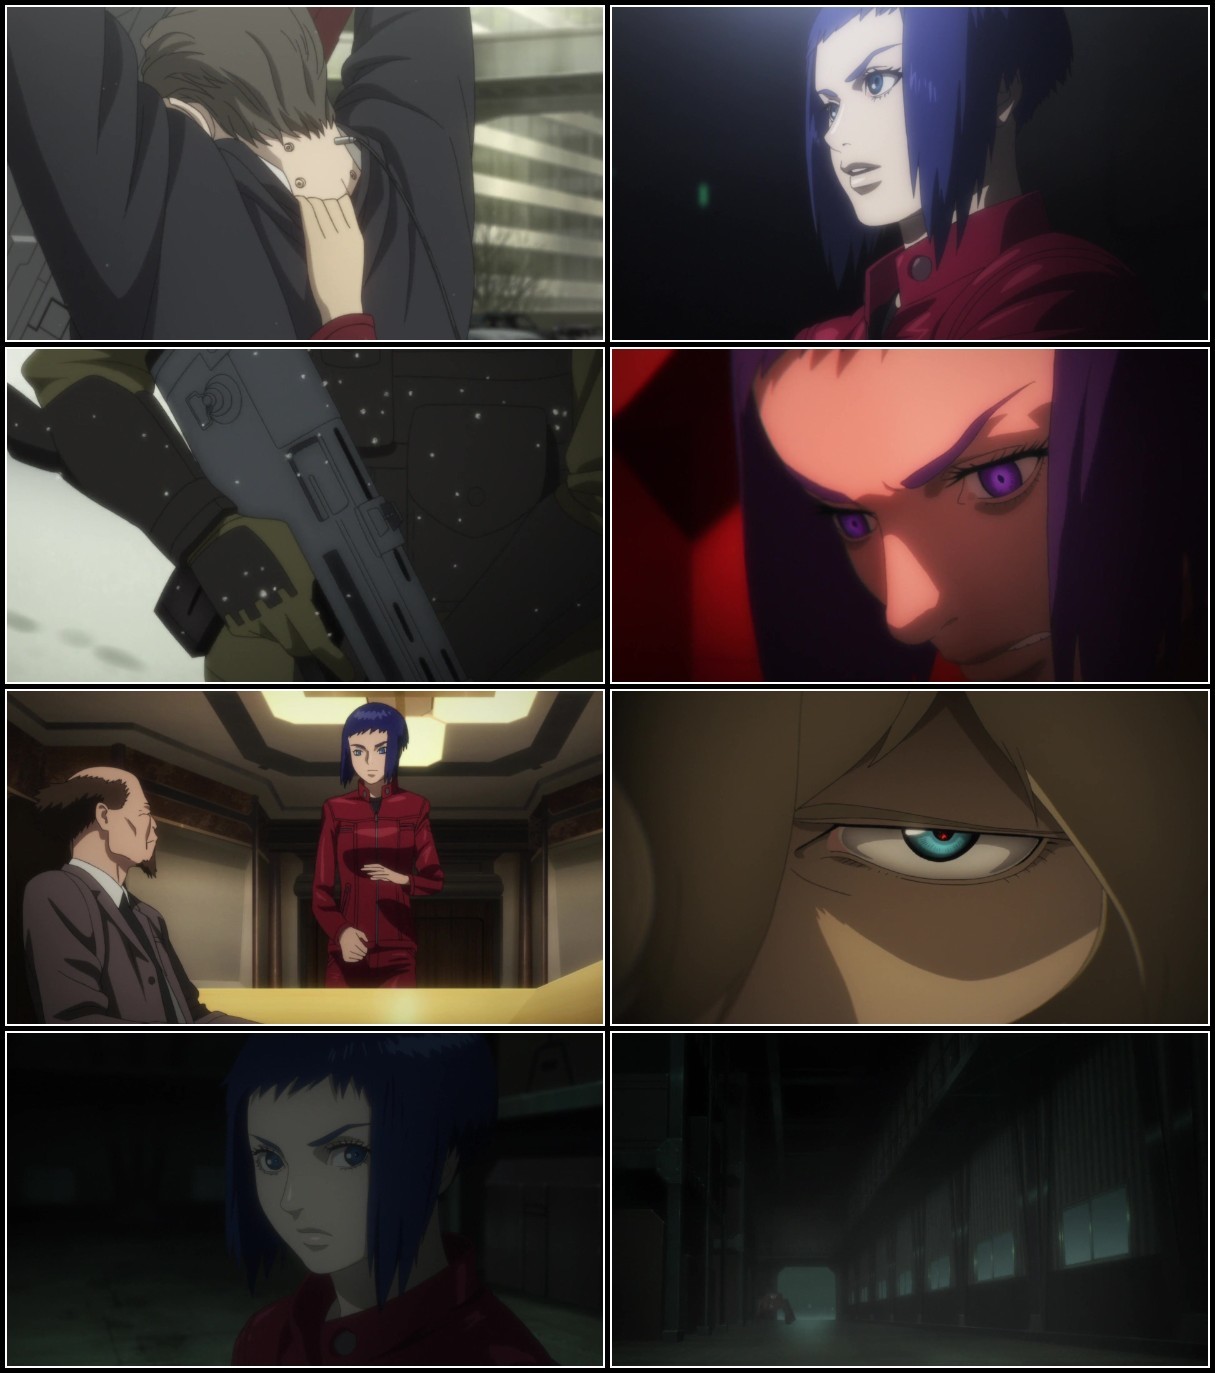 Ghost In The Shell ARise - Pyrophoric Cult (2015) 1080p BluRay 5.1 YTS 7tHeSyDW_o